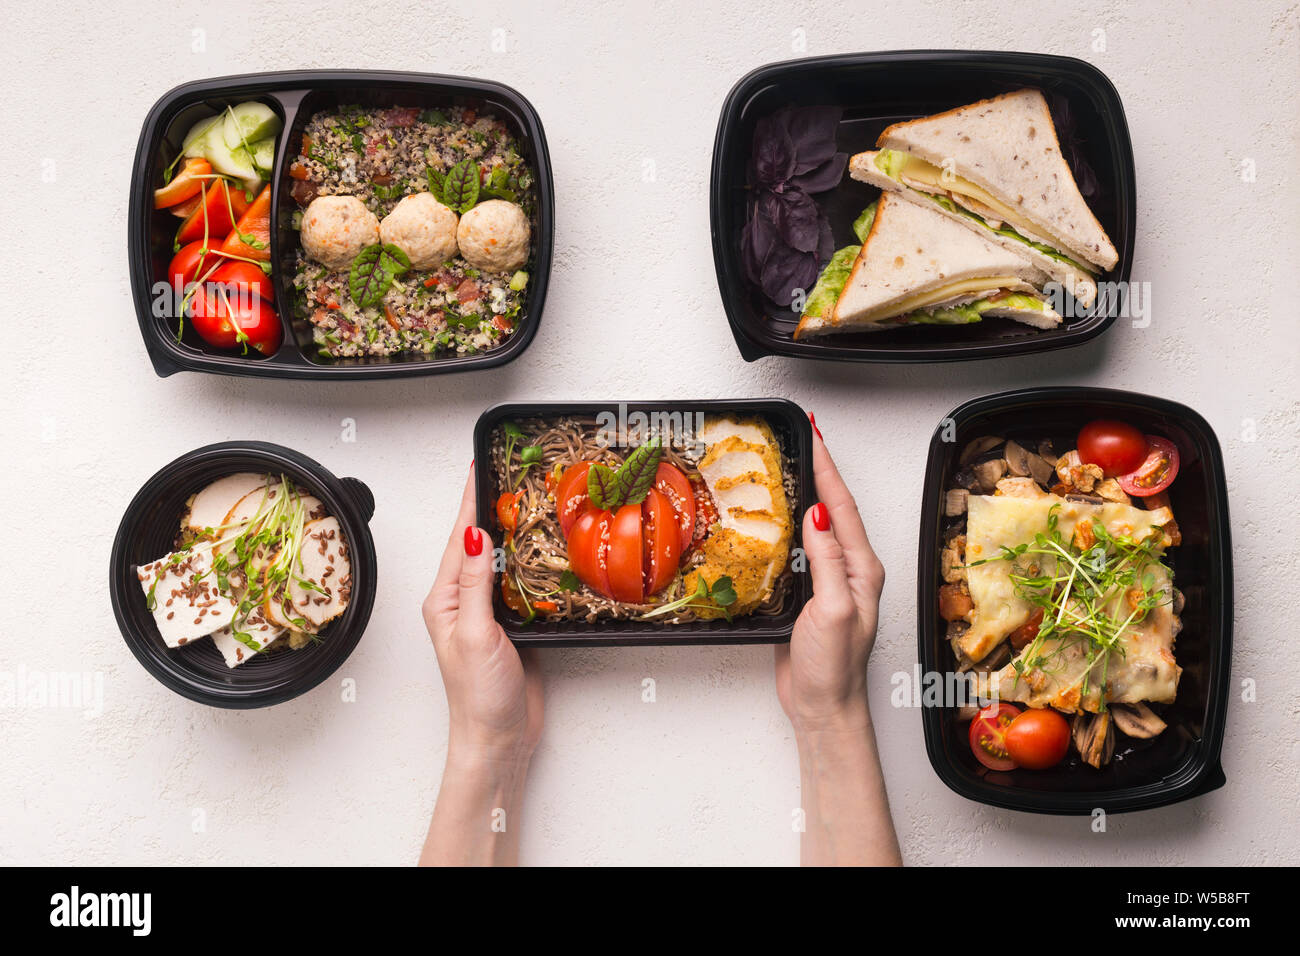 Resraurant food in take away boxes for healthy nutrition Stock Photo